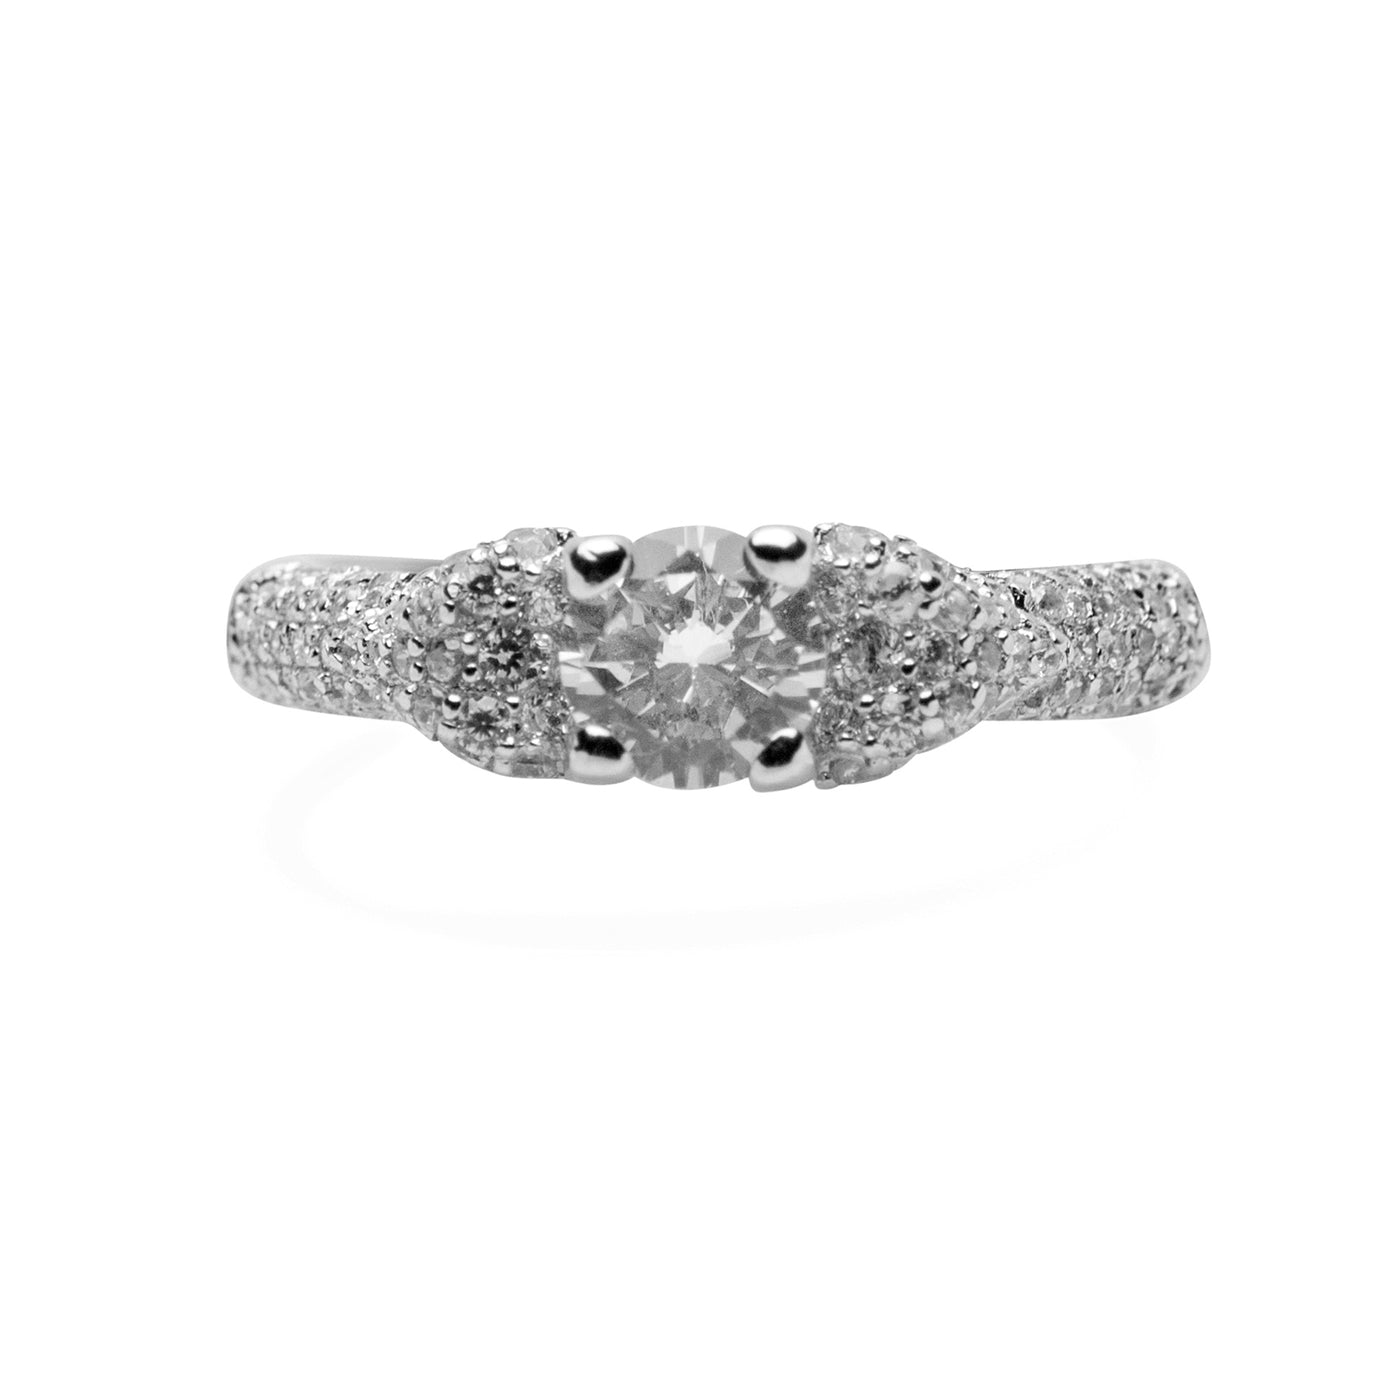 Round Cut Cubic Zirconia Sterling Silver Ring | SilverAndGold